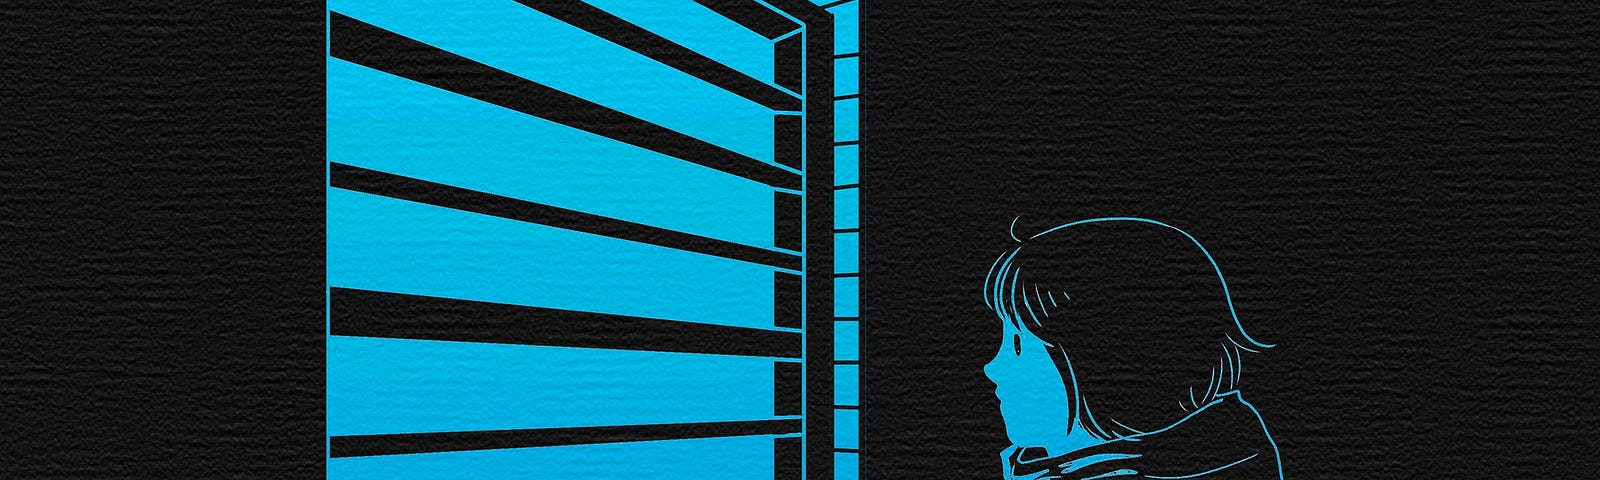 A black and turquoise digital illustration of someone bundled in a coat looking through a window